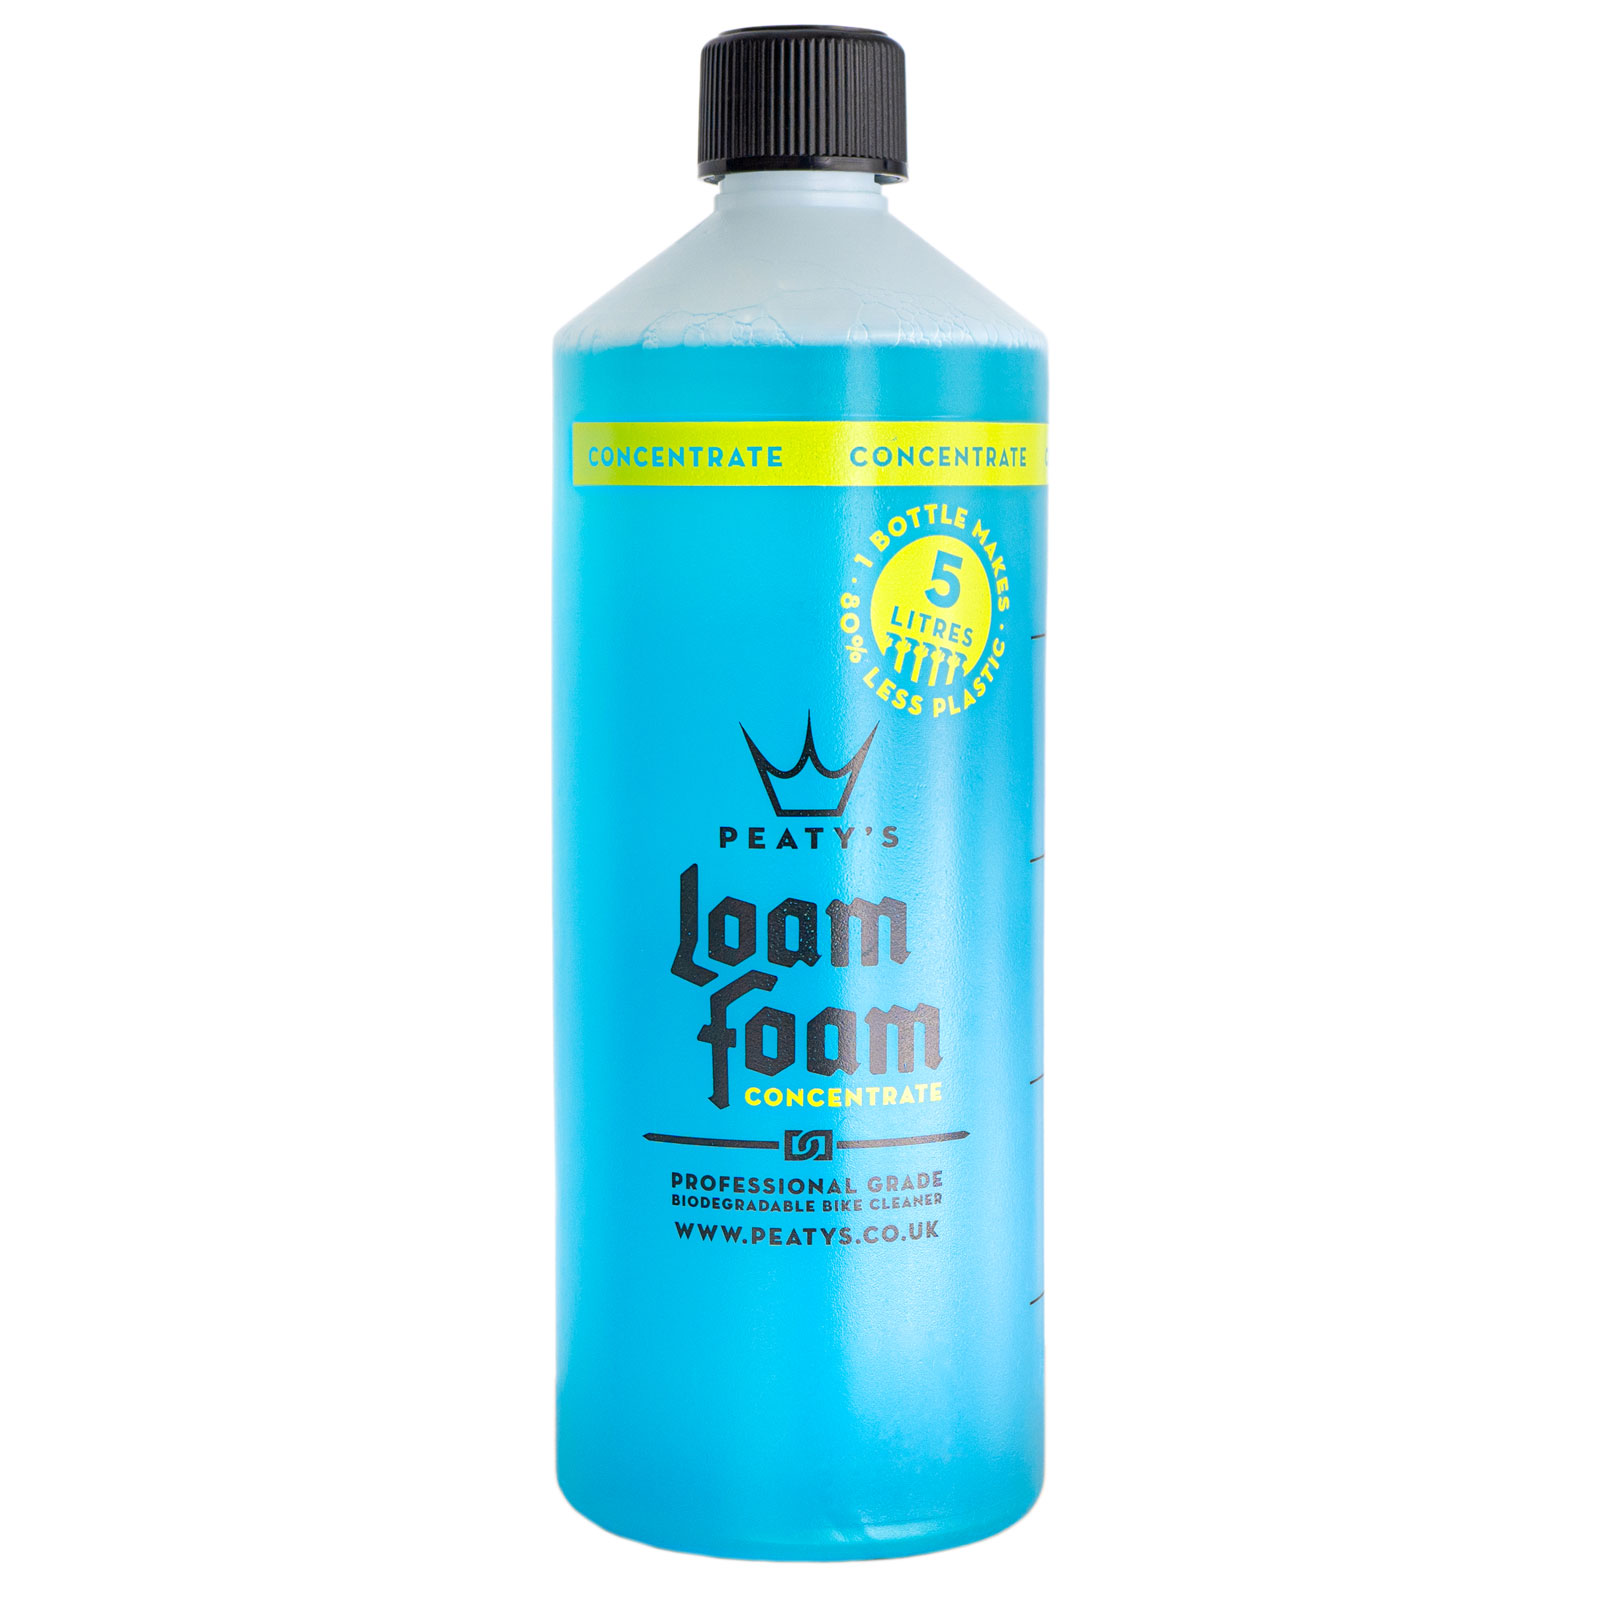 Picture of Peaty&#039;s Loam Foam Concentrate Bike Cleaner - 1 Liter